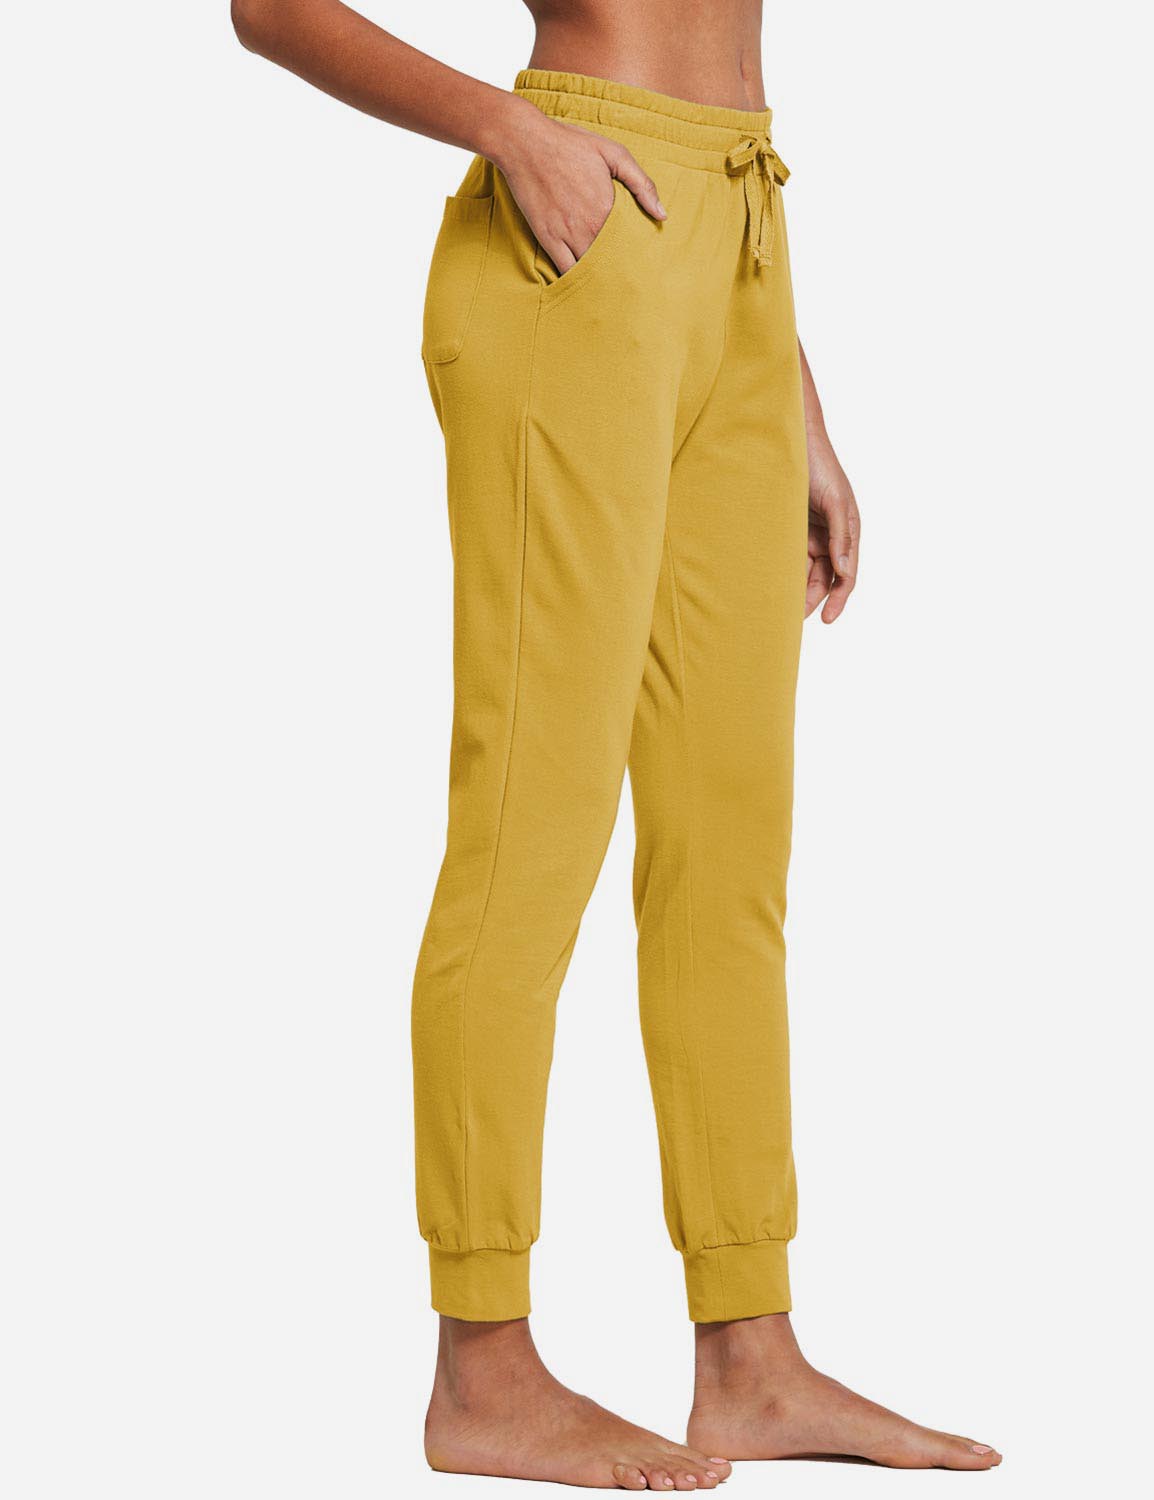 Baleaf Women's Cotton Comfy Pocketed & Tapered Weekend Joggers abh103 Misted Yellow Side